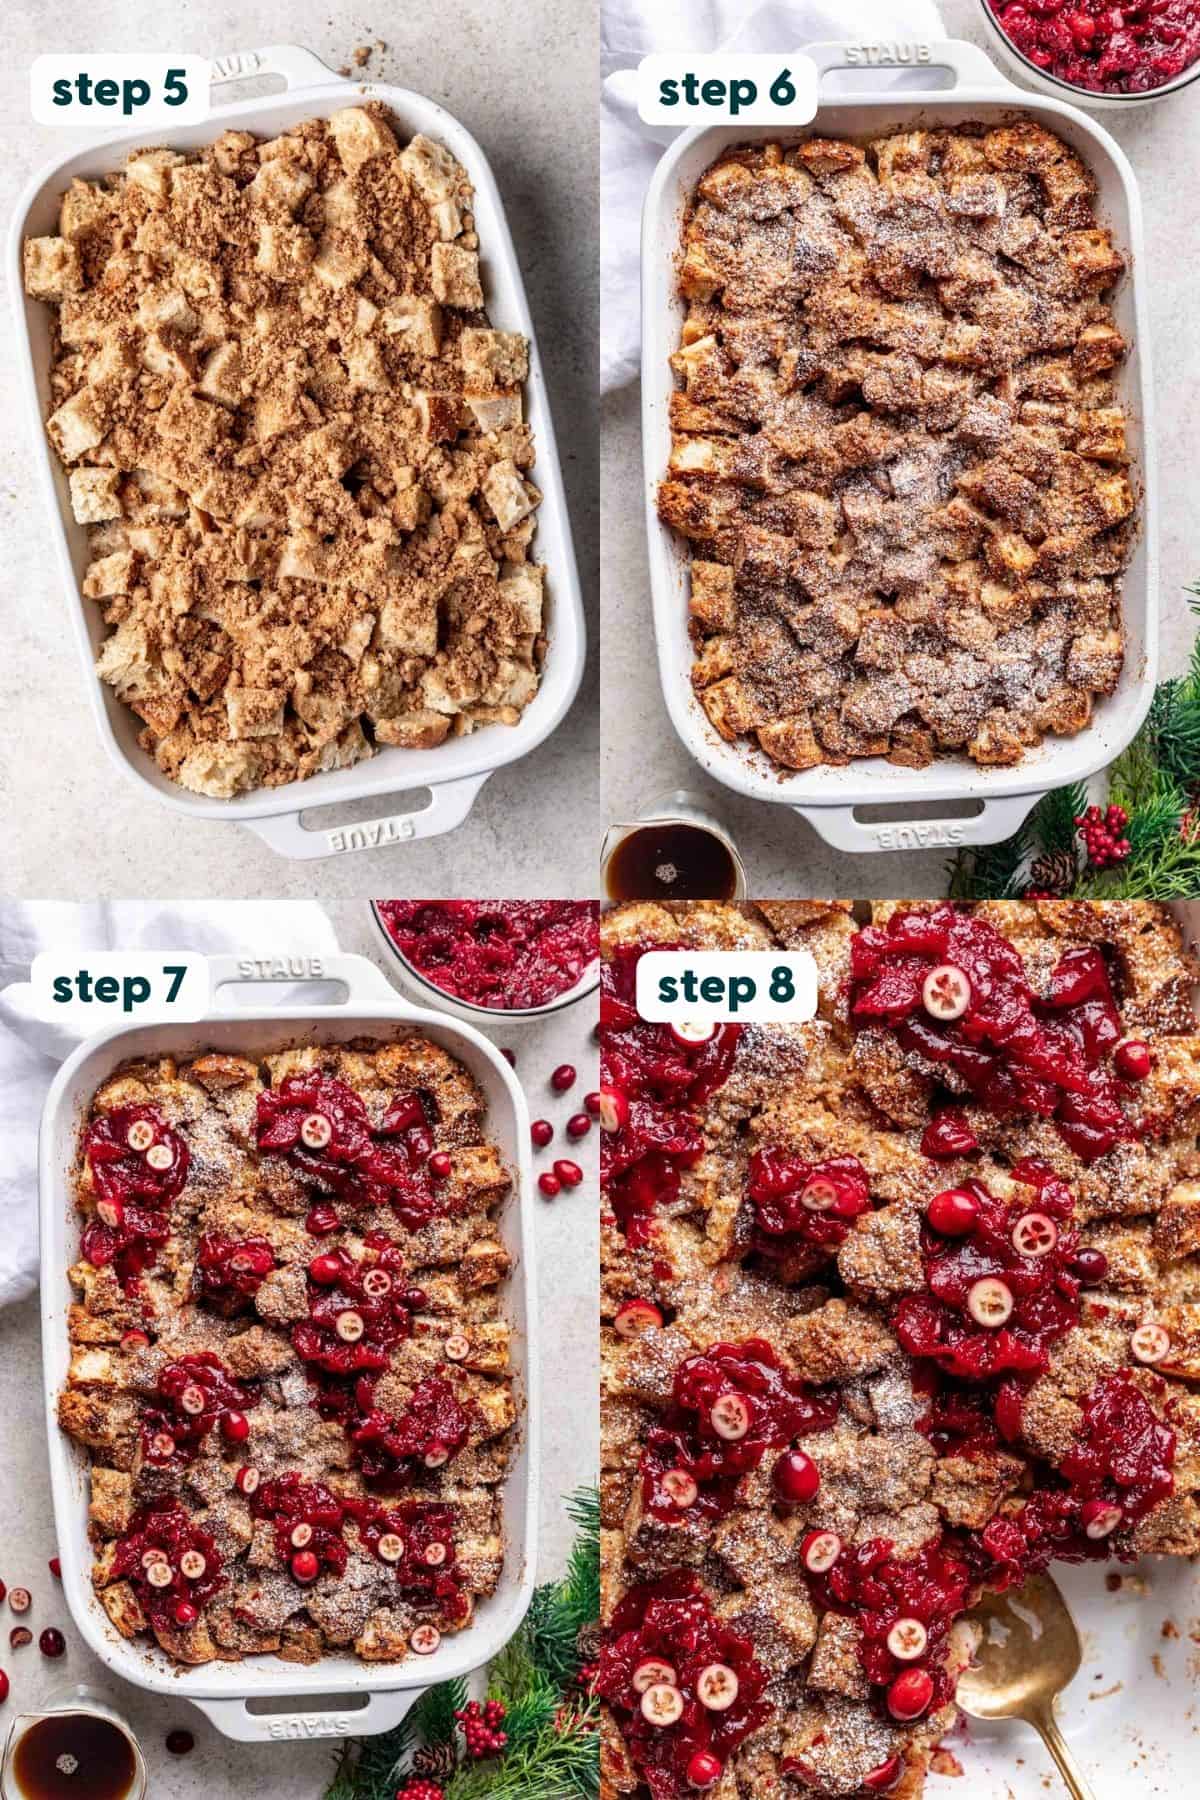 Step by step how to make vegan french toast casserole.